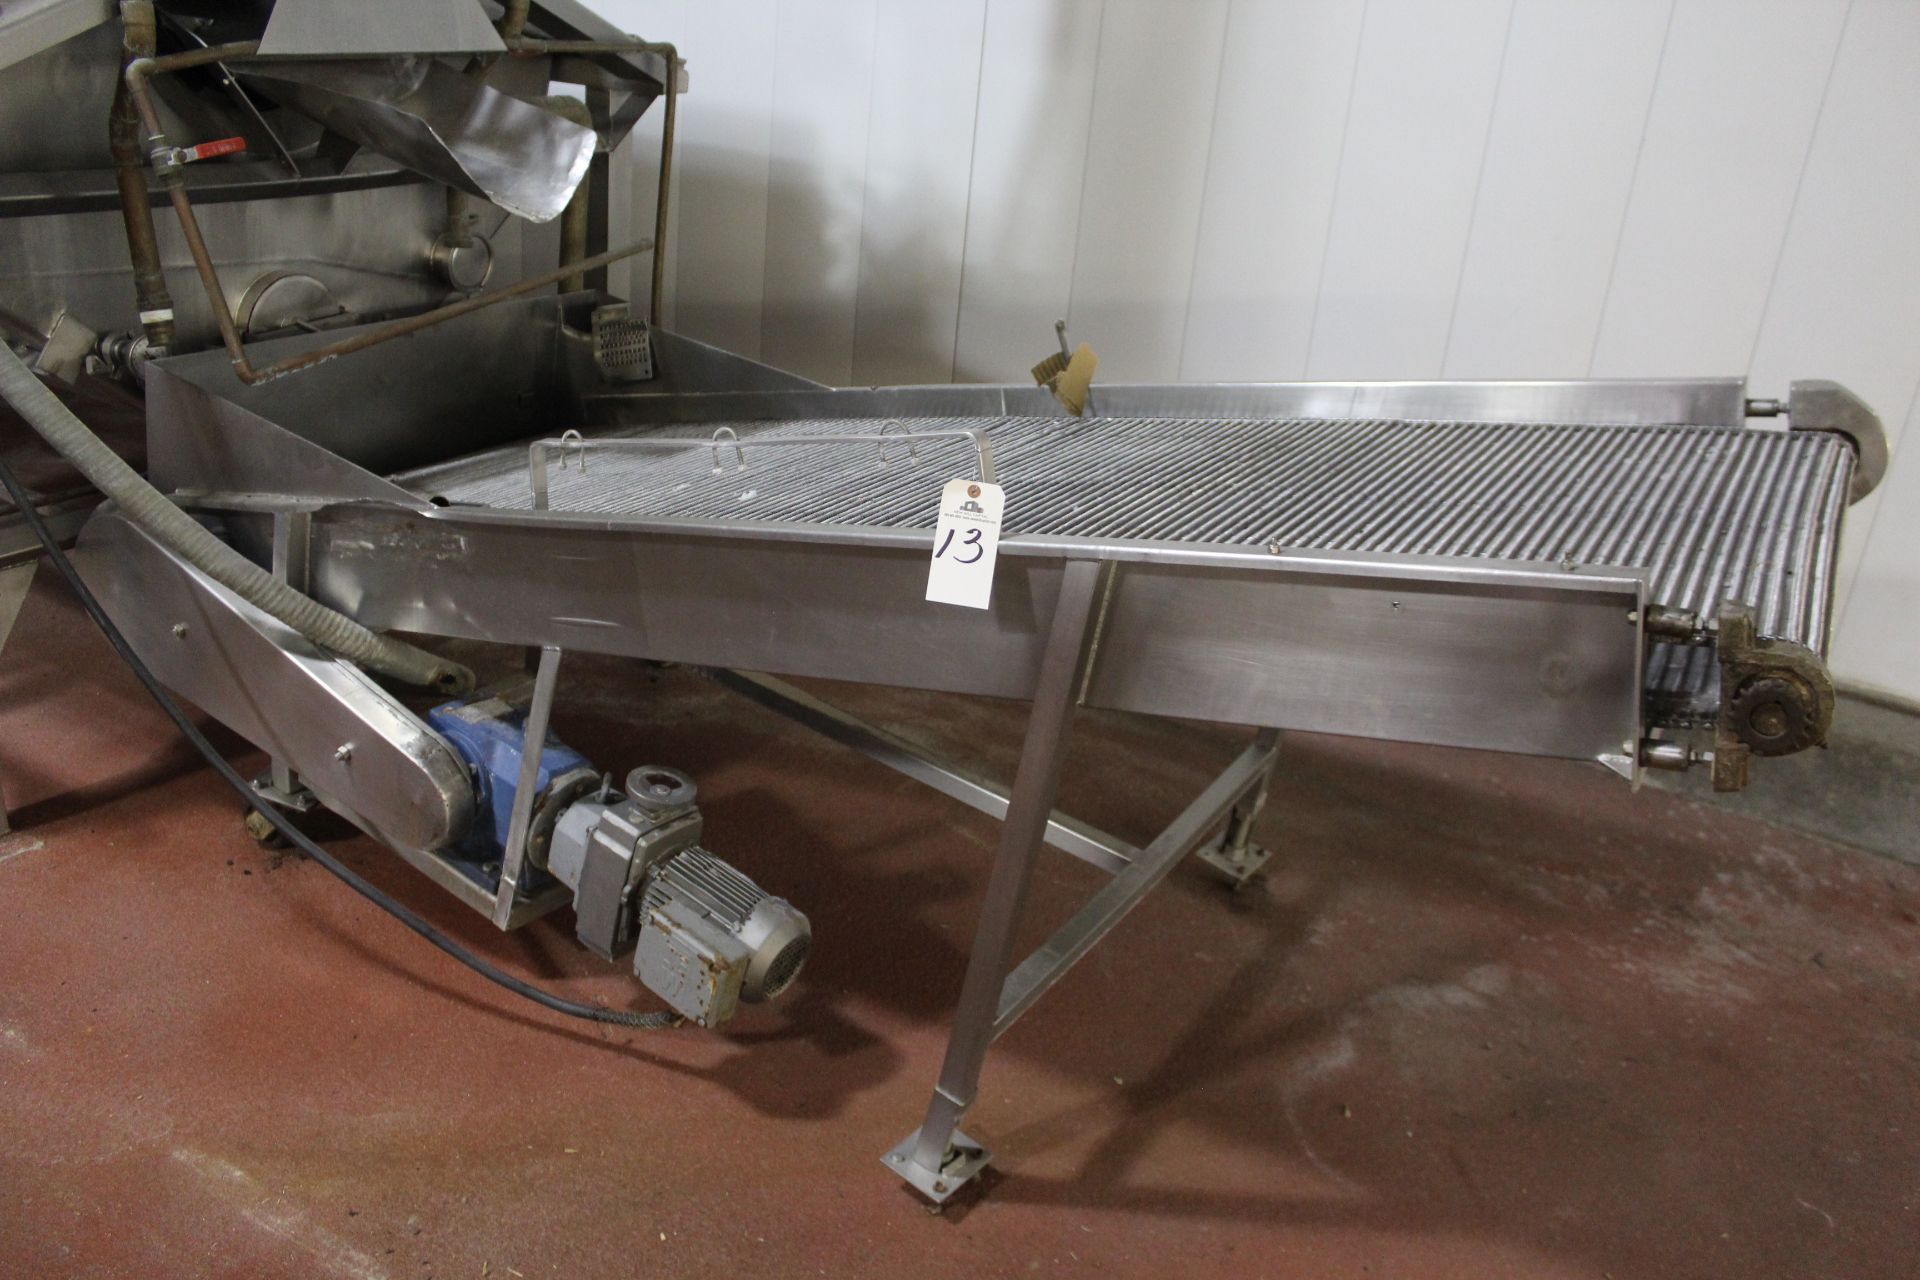 Stainless Steel Mesh Drip Conveyor Section, 38" X 8' | Rigging Price: $300